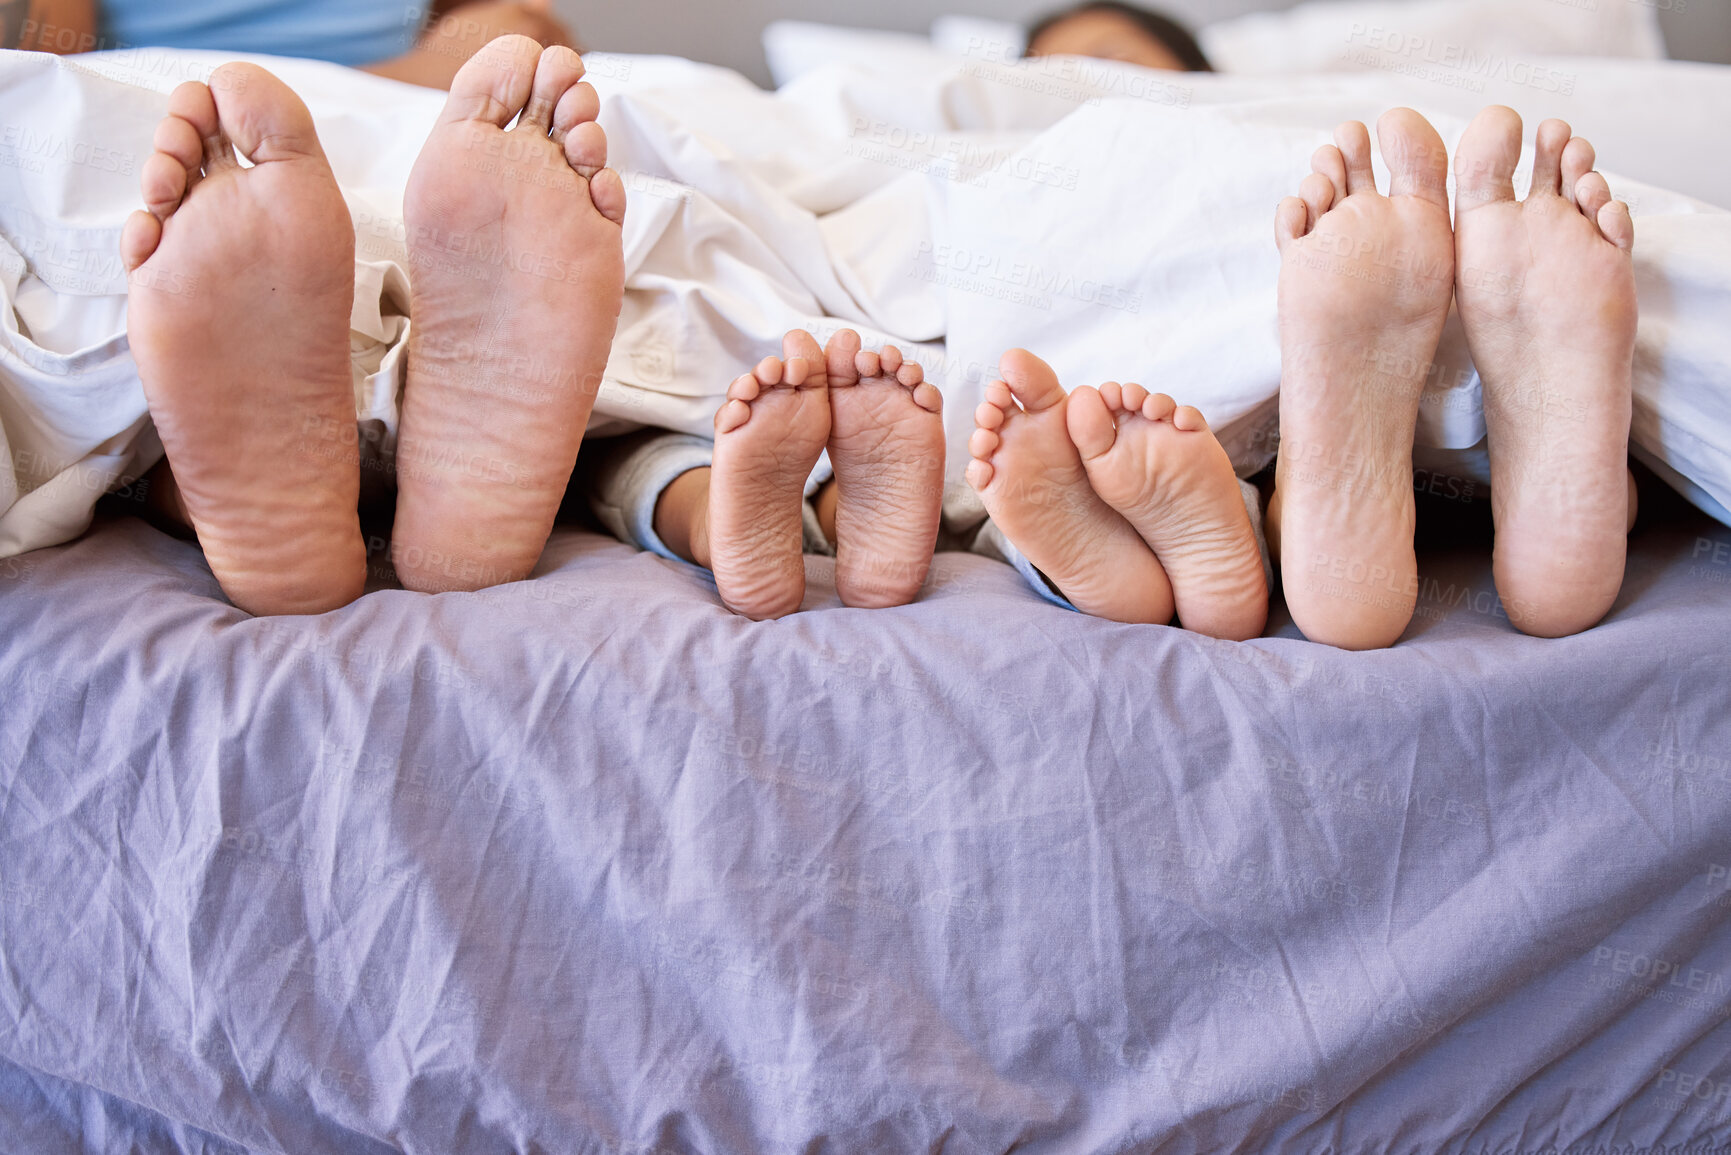 Buy stock photo Feet of family lying in bed. Closeup of feet of parents and children side by side in bed. Family relaxing in bed together. Below bare feet of family in bed. Kids resting in bed with their parents.